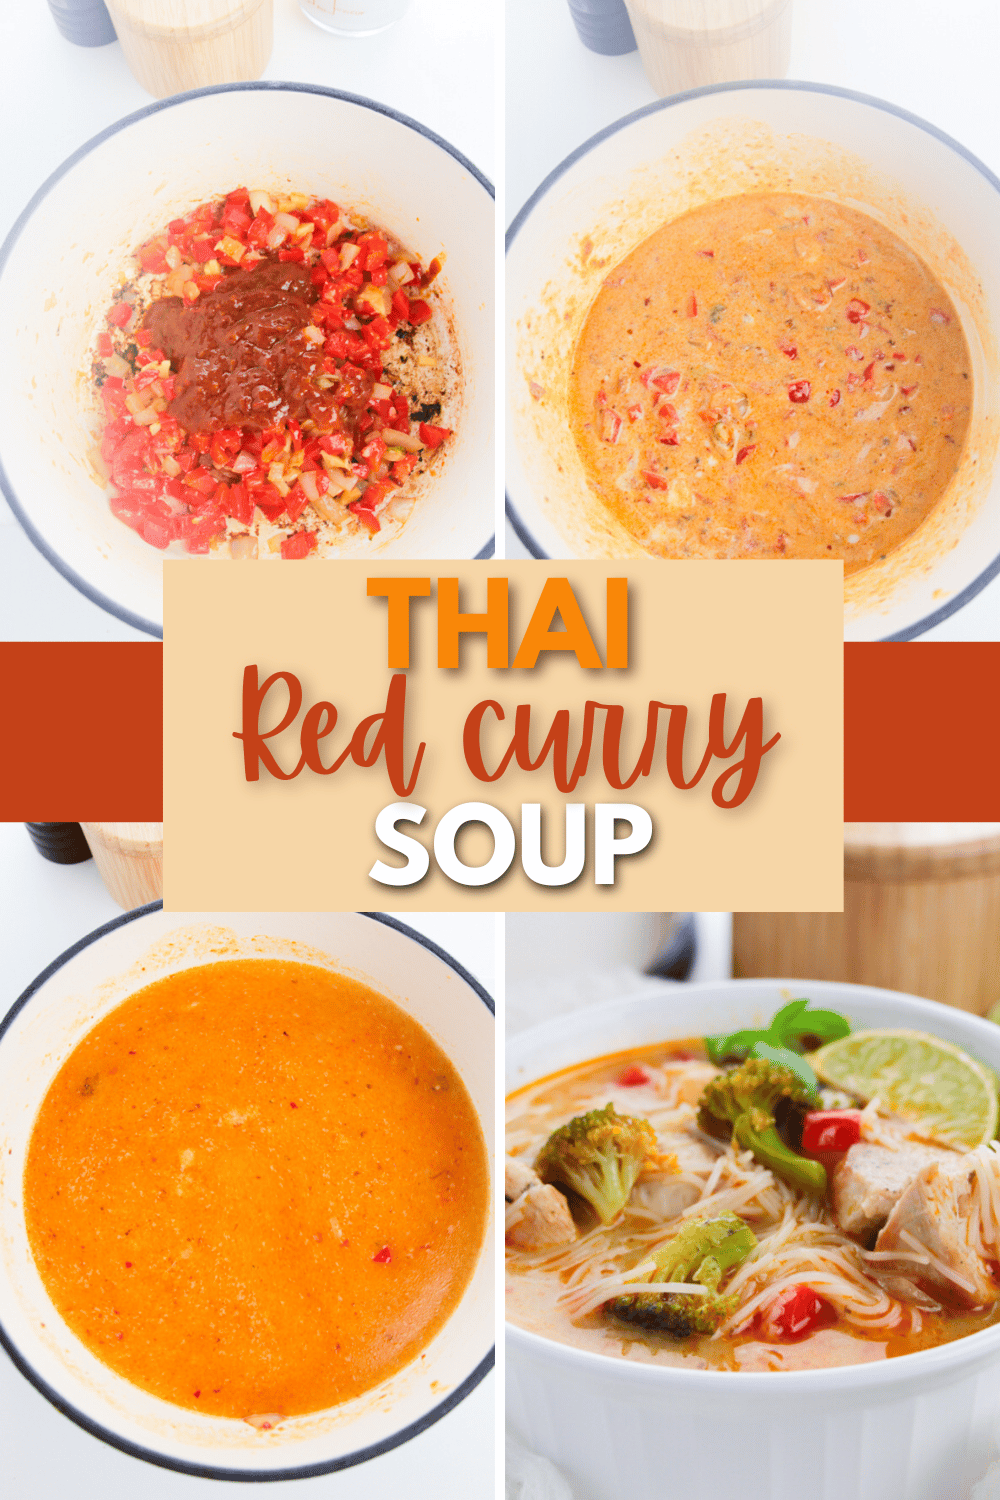 Thai red curry soup is a delicious and easy-to-make soup that is perfect for any occasion. This soup will warm you up from the inside out. #thairedcurrysoup #soup #fallrecipe #thaicurry via @wondermomwannab